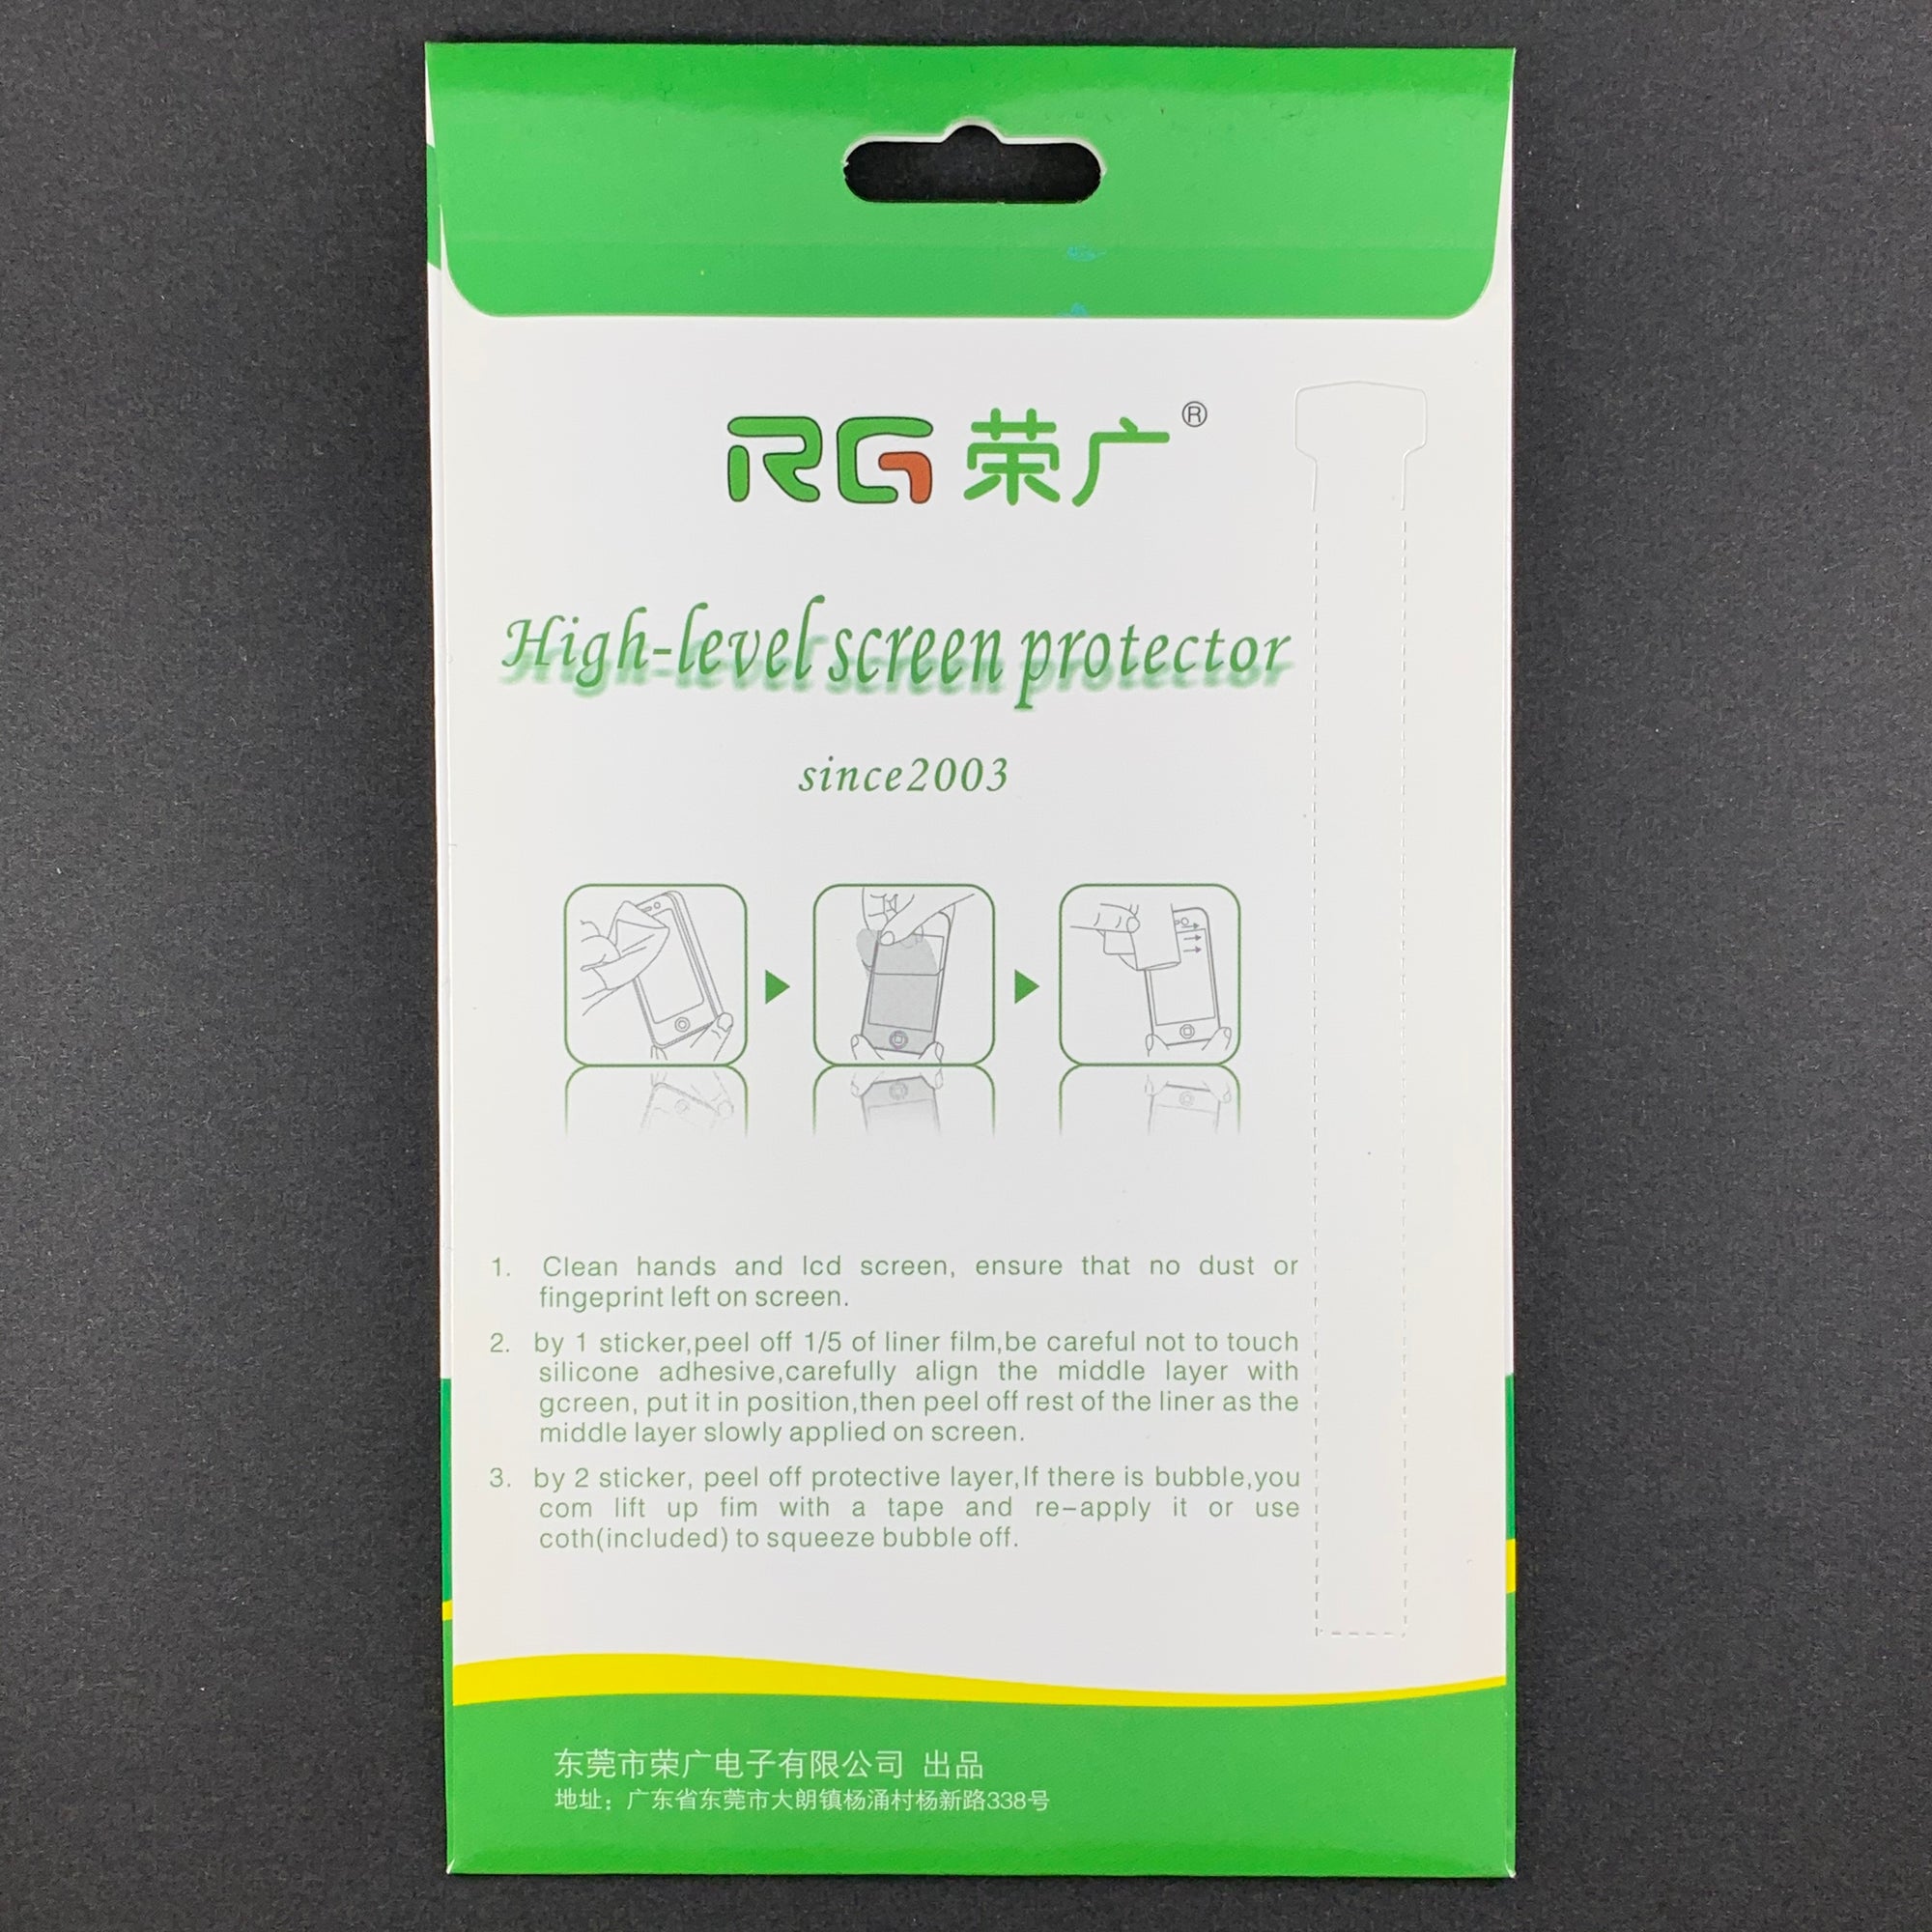 RG Professional Soft Film Screen Protector for iPad Air / Air 2 / Pro 9.7 5th / 6th (CLEAR, 2-PACK)